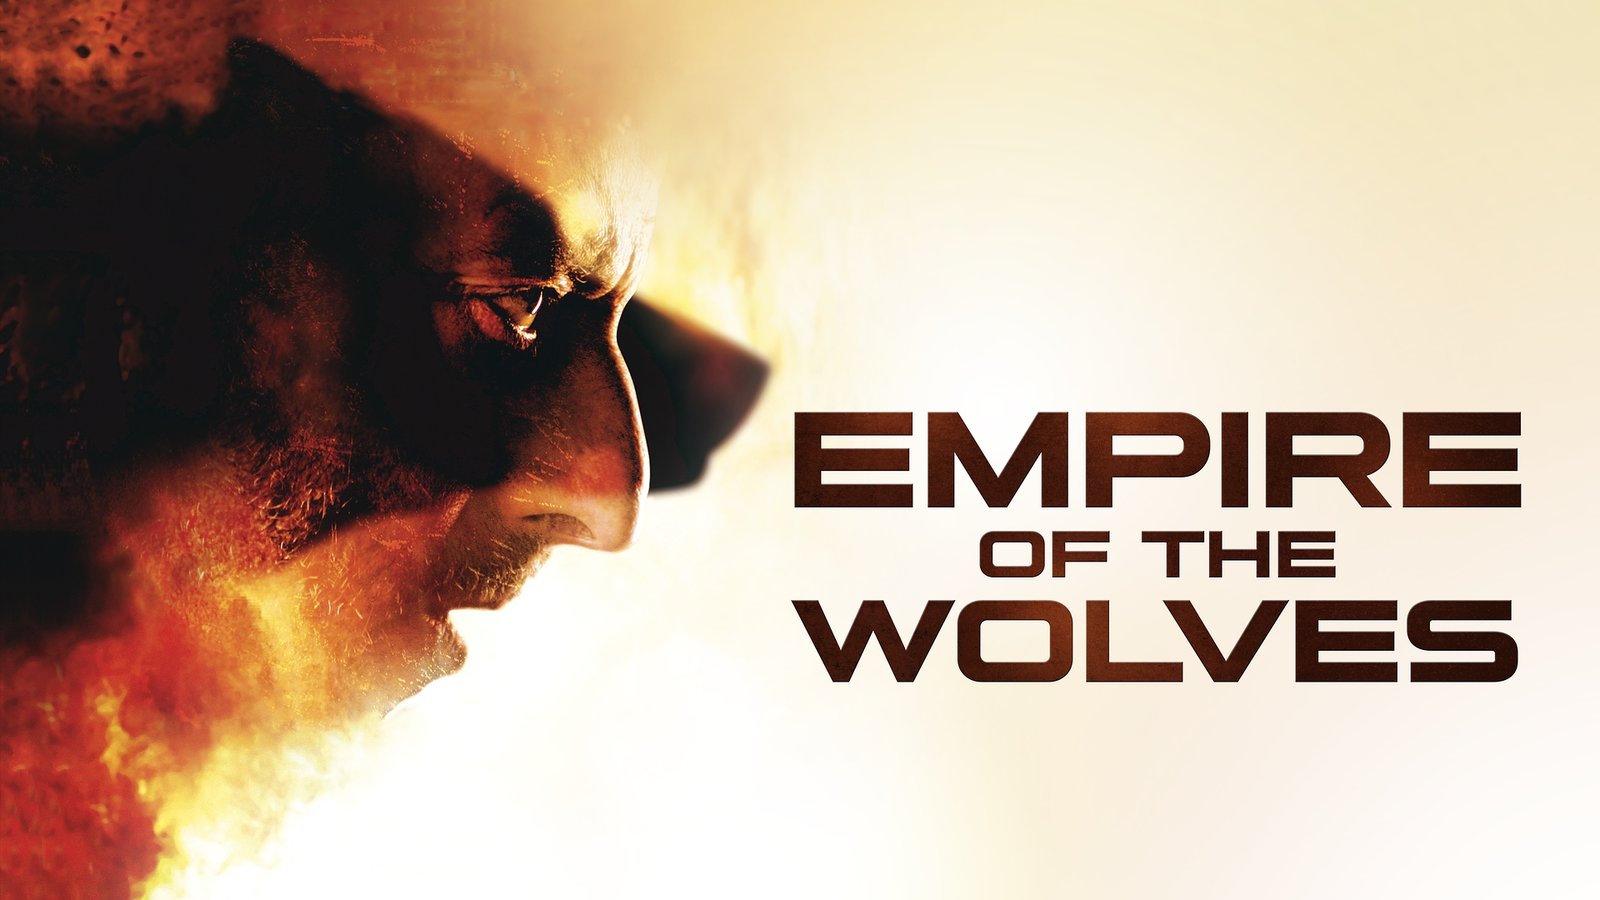 Empire of the Wolves